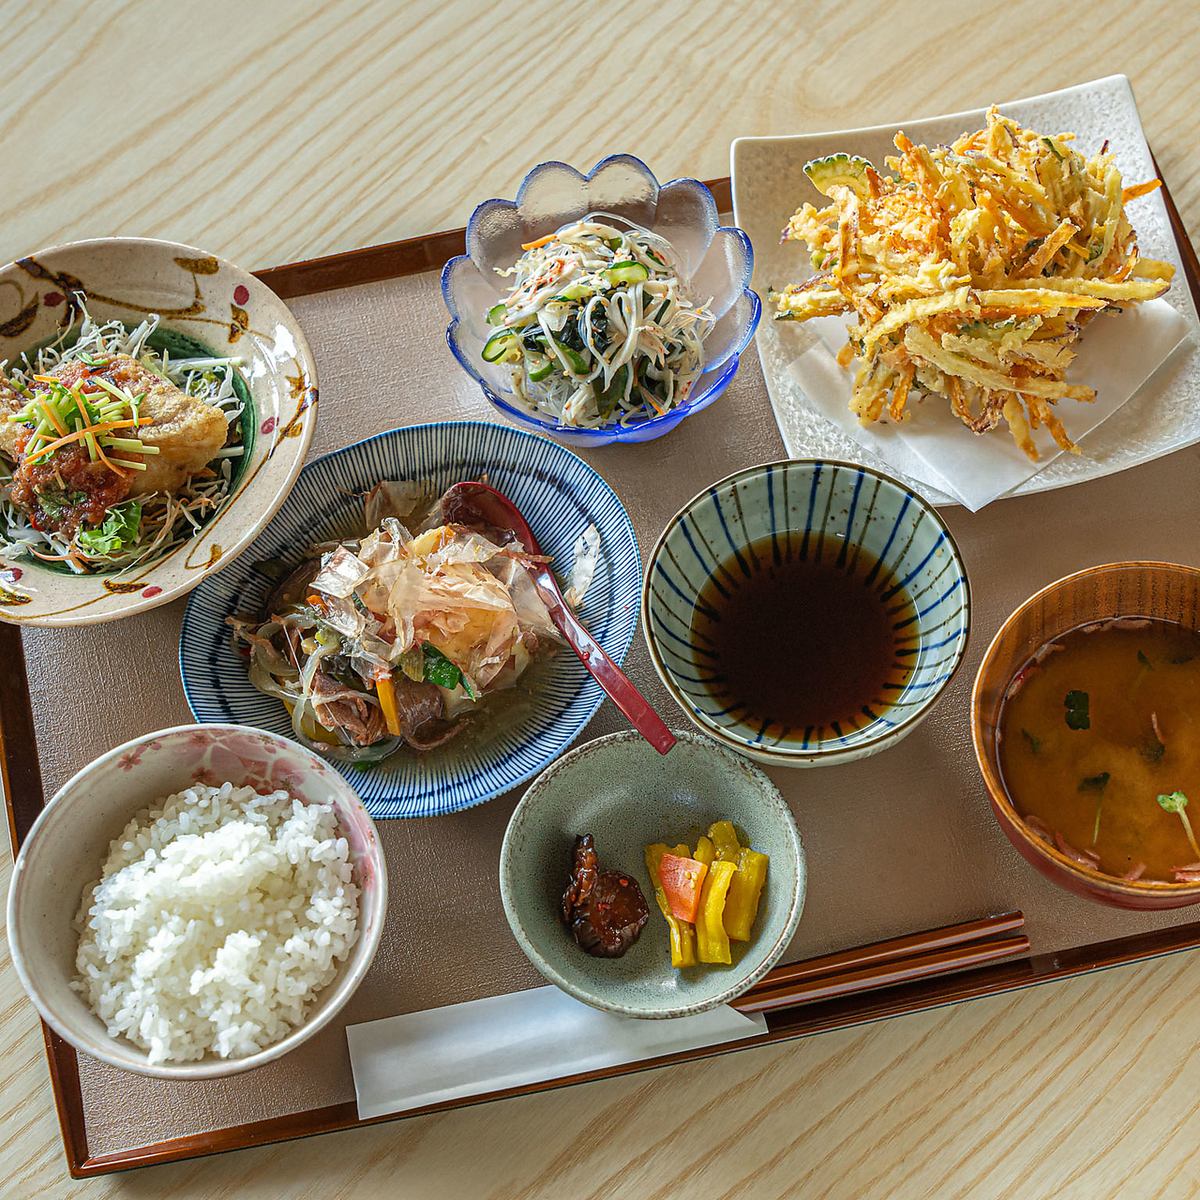 We recommend the lunch menu where you can enjoy our proud obanzai and tempura♪